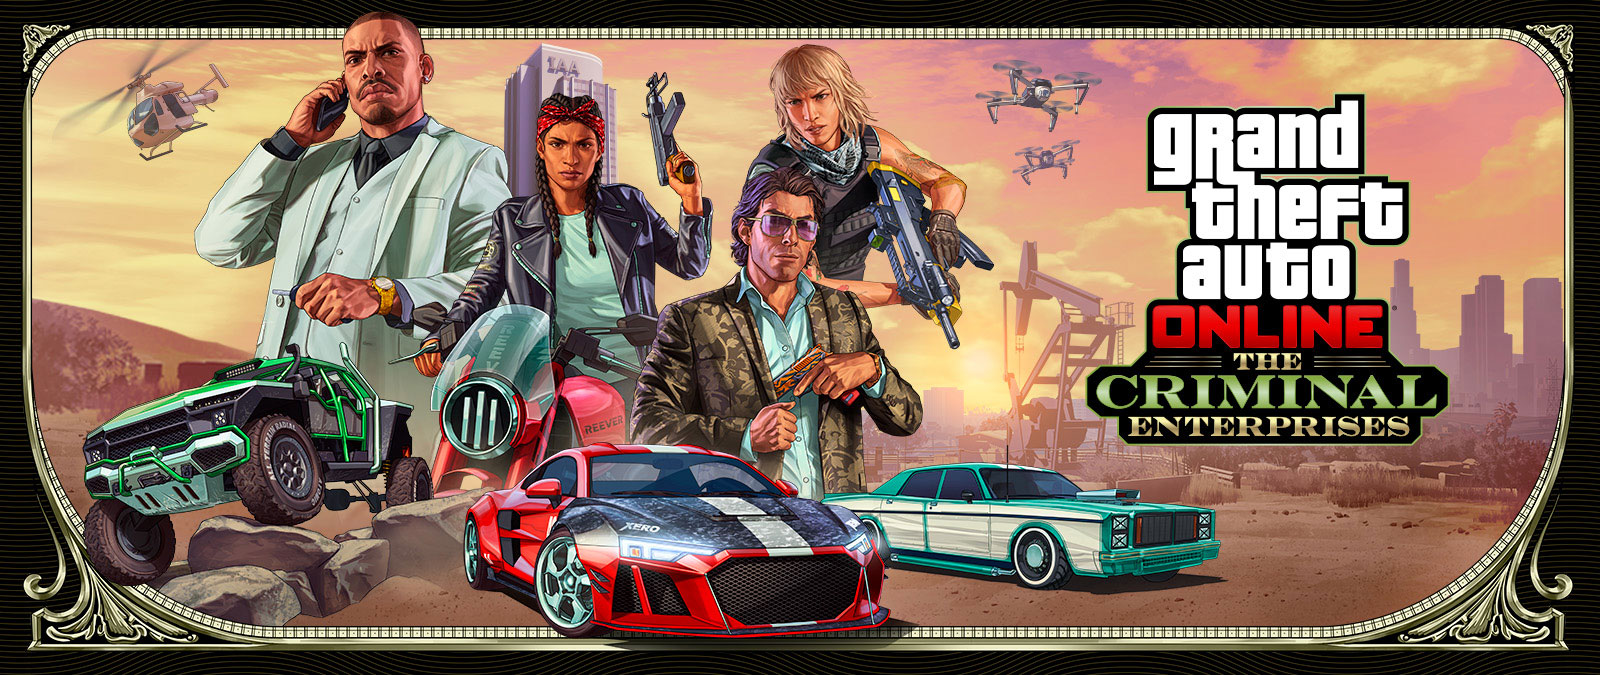 Grand Theft Auto Online: The Criminal Enterprises, Three stylish vehicles race through the foreground as four characters pose overhead.